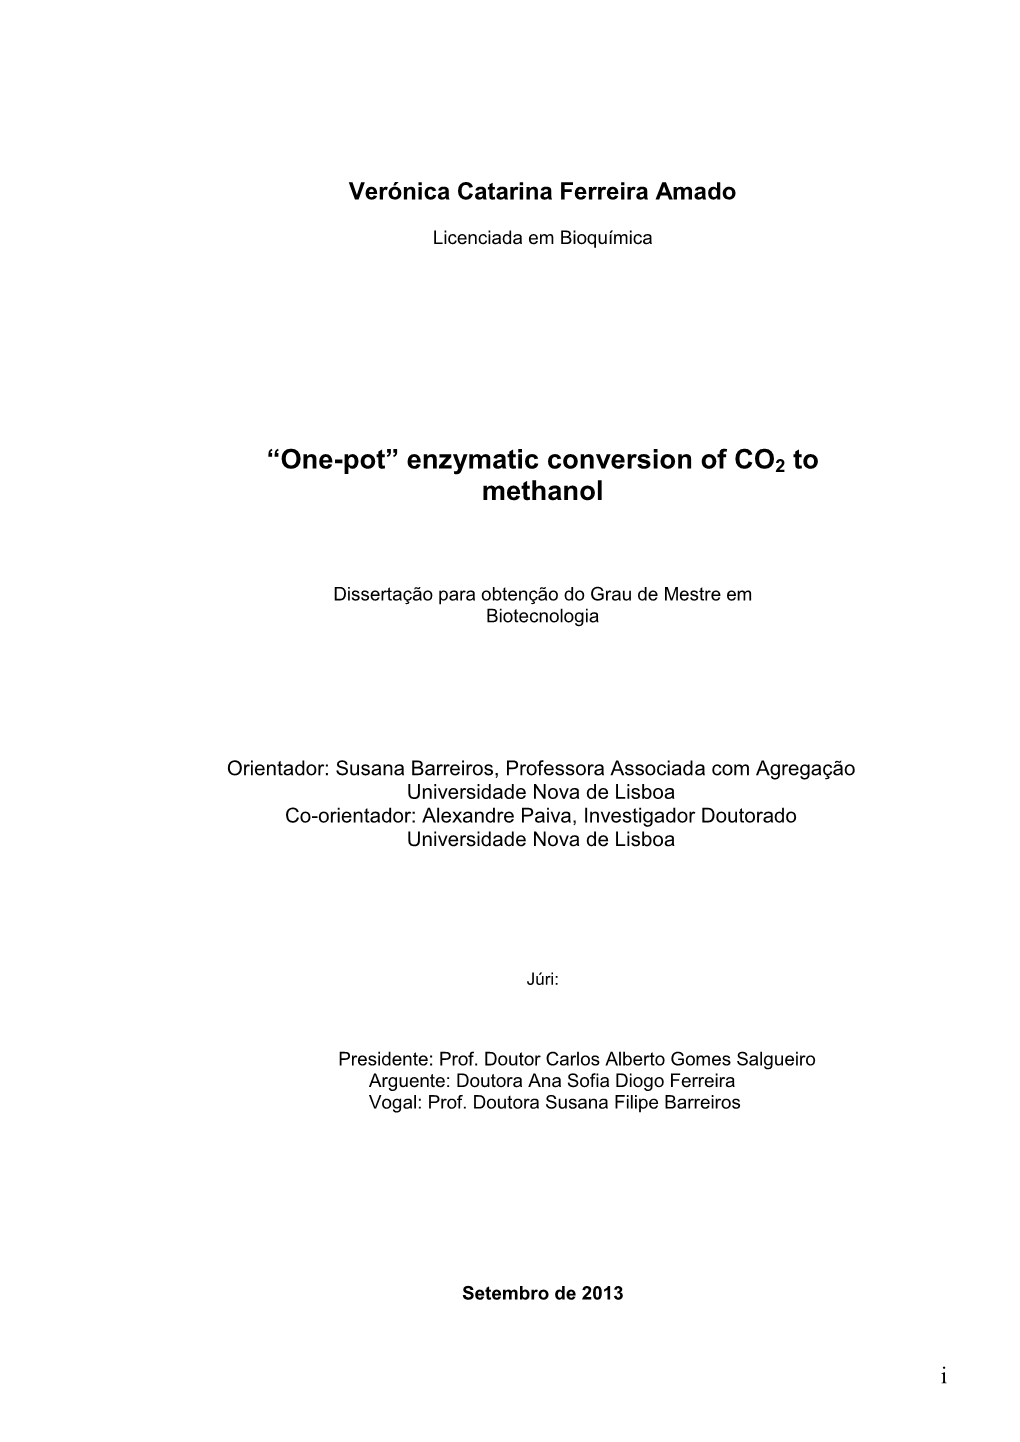 Enzymatic Conversion of CO2 to Methanol